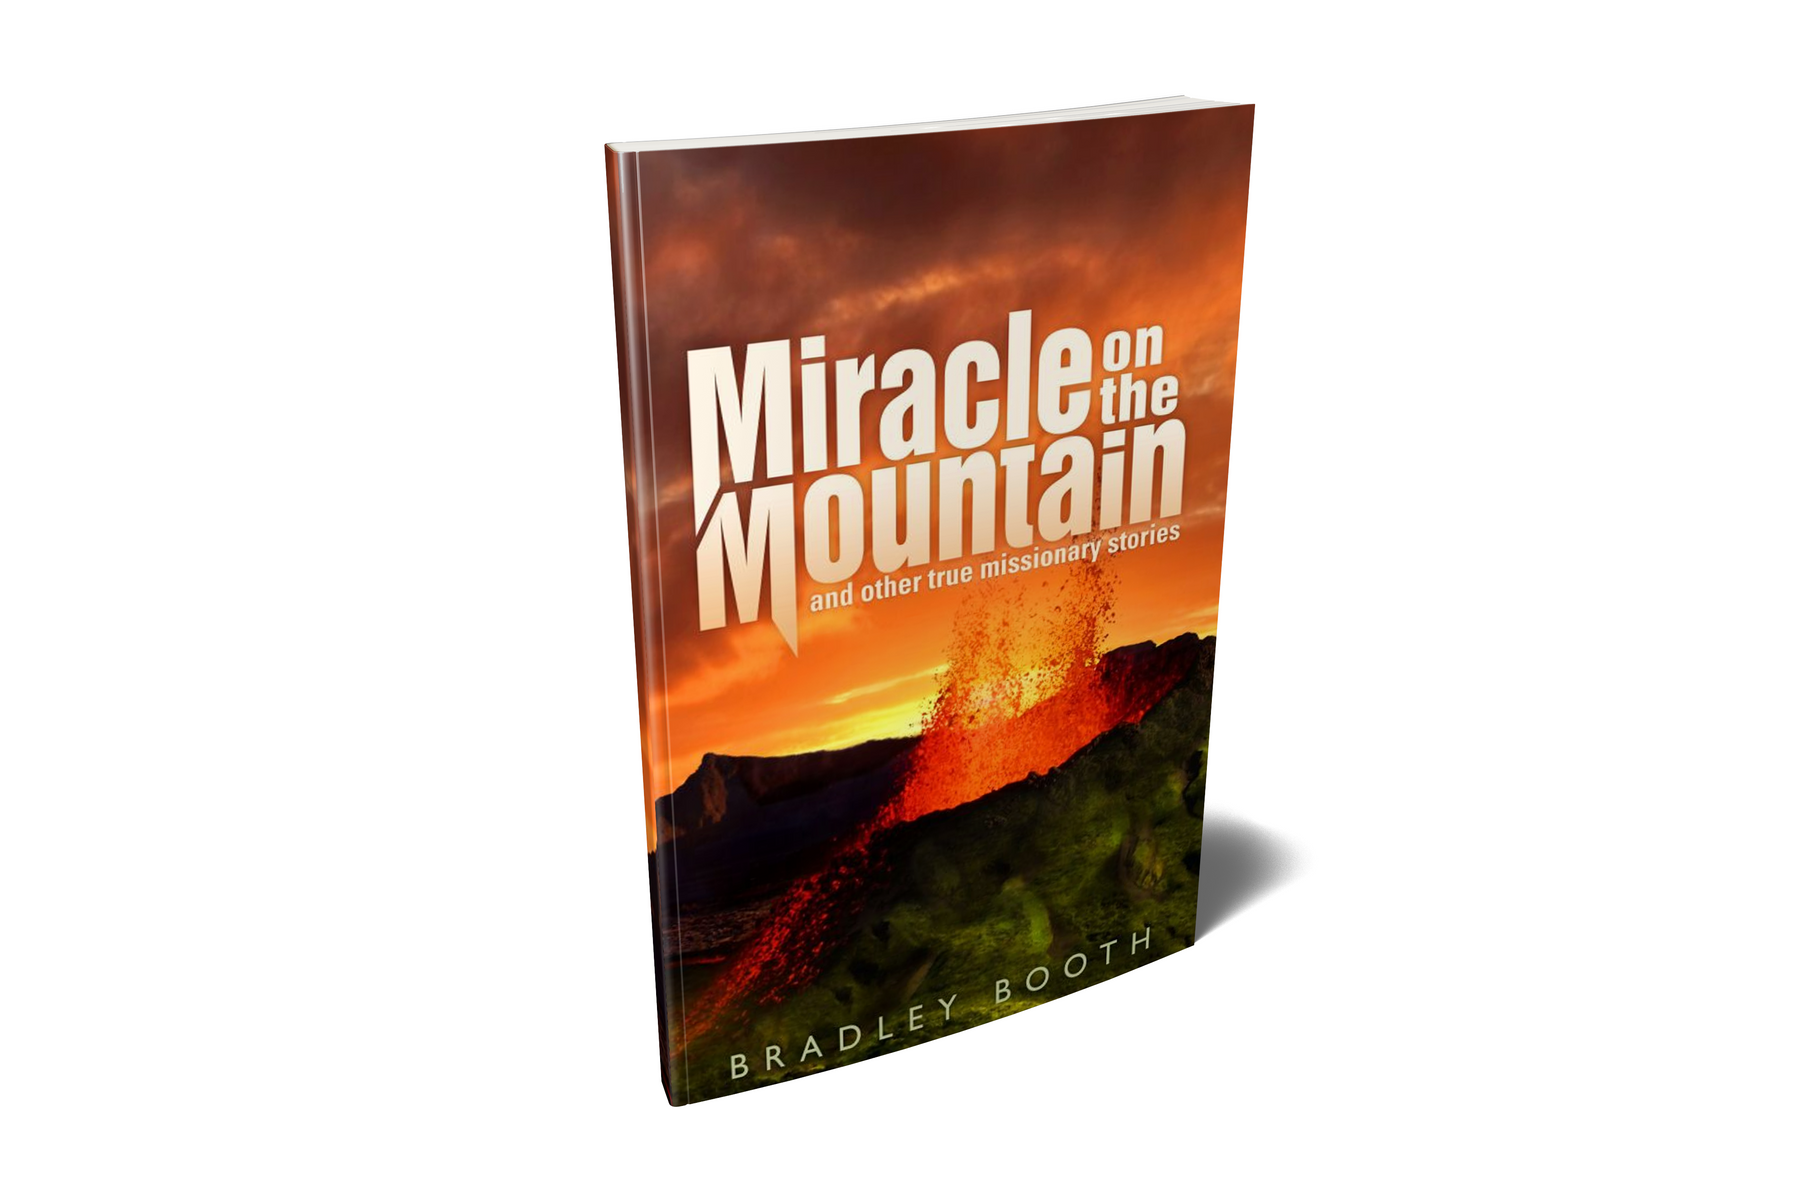 Miracle on the Mountain by Bradley Booth